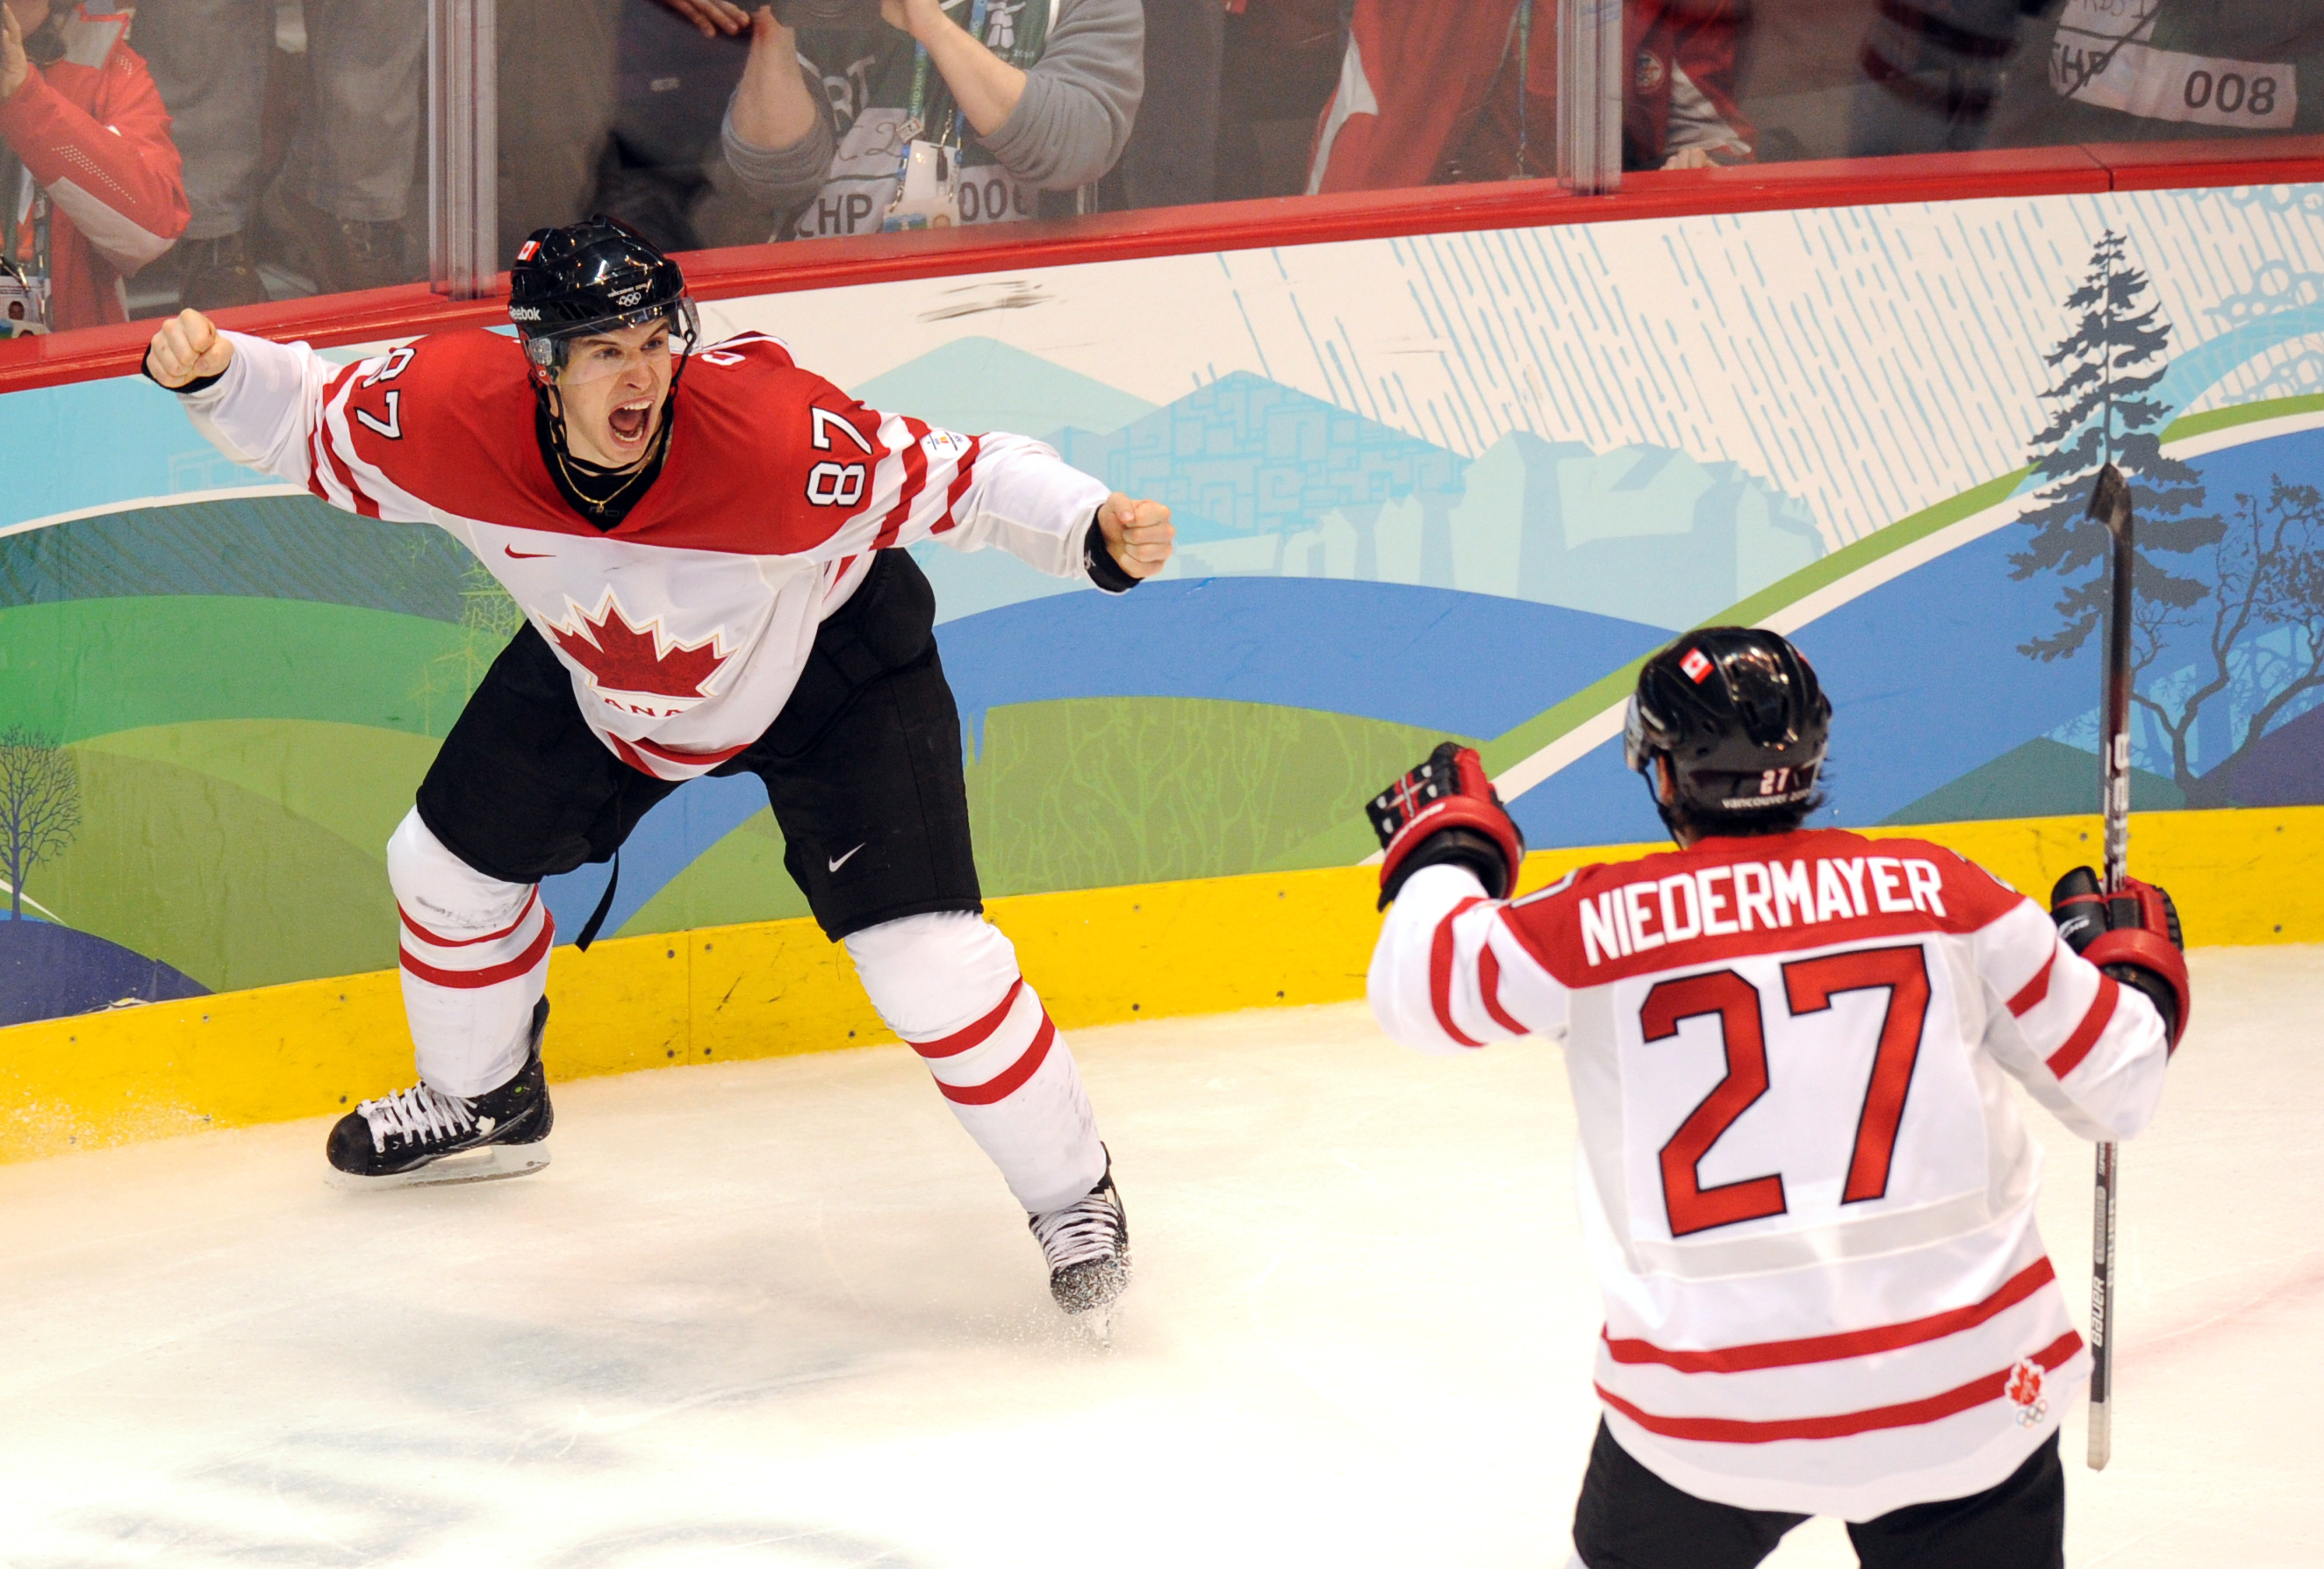 Canadian forward Sidney Crosby (87) and Canadian defenseman Scott Niedermayer (27) jubilate as their team wins gold against the USA in the Men's Gold Medal Hockey match at the Canada Hockey Place during the XXI Winter Olympic Games in Vancouver, Canada on February 28, 2010. (Yuri Kadobnov&mdash;AFP/Getty Images)